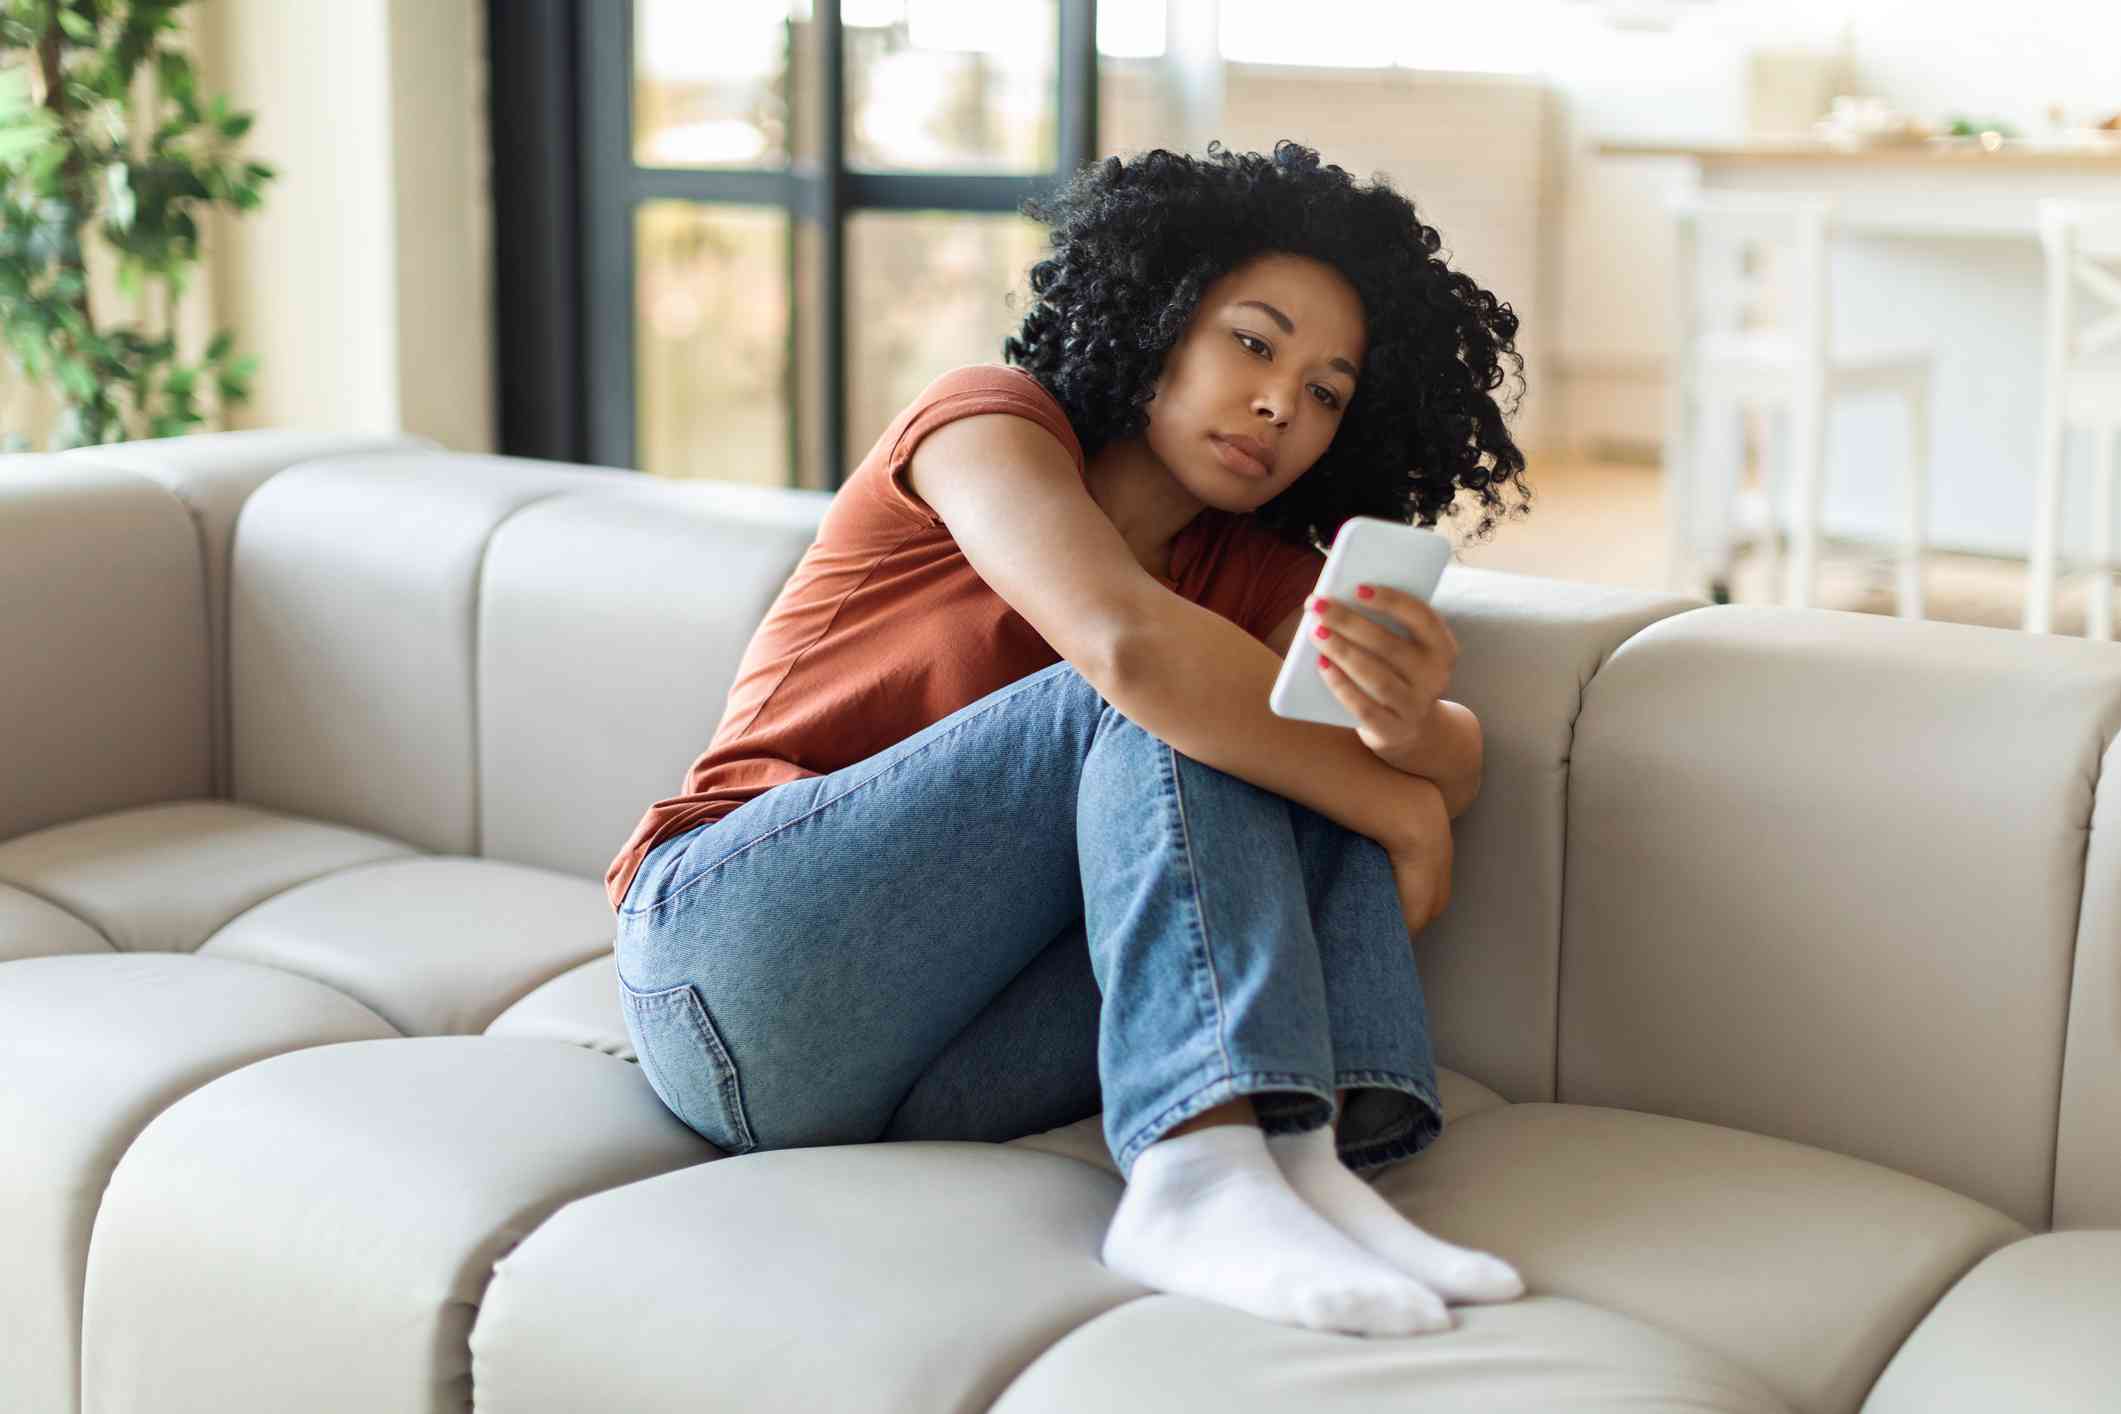 A woman in a brown shirt sits on the couch with her knees pulled up to her chest as she looks at the phone in her hand with a serious expression.